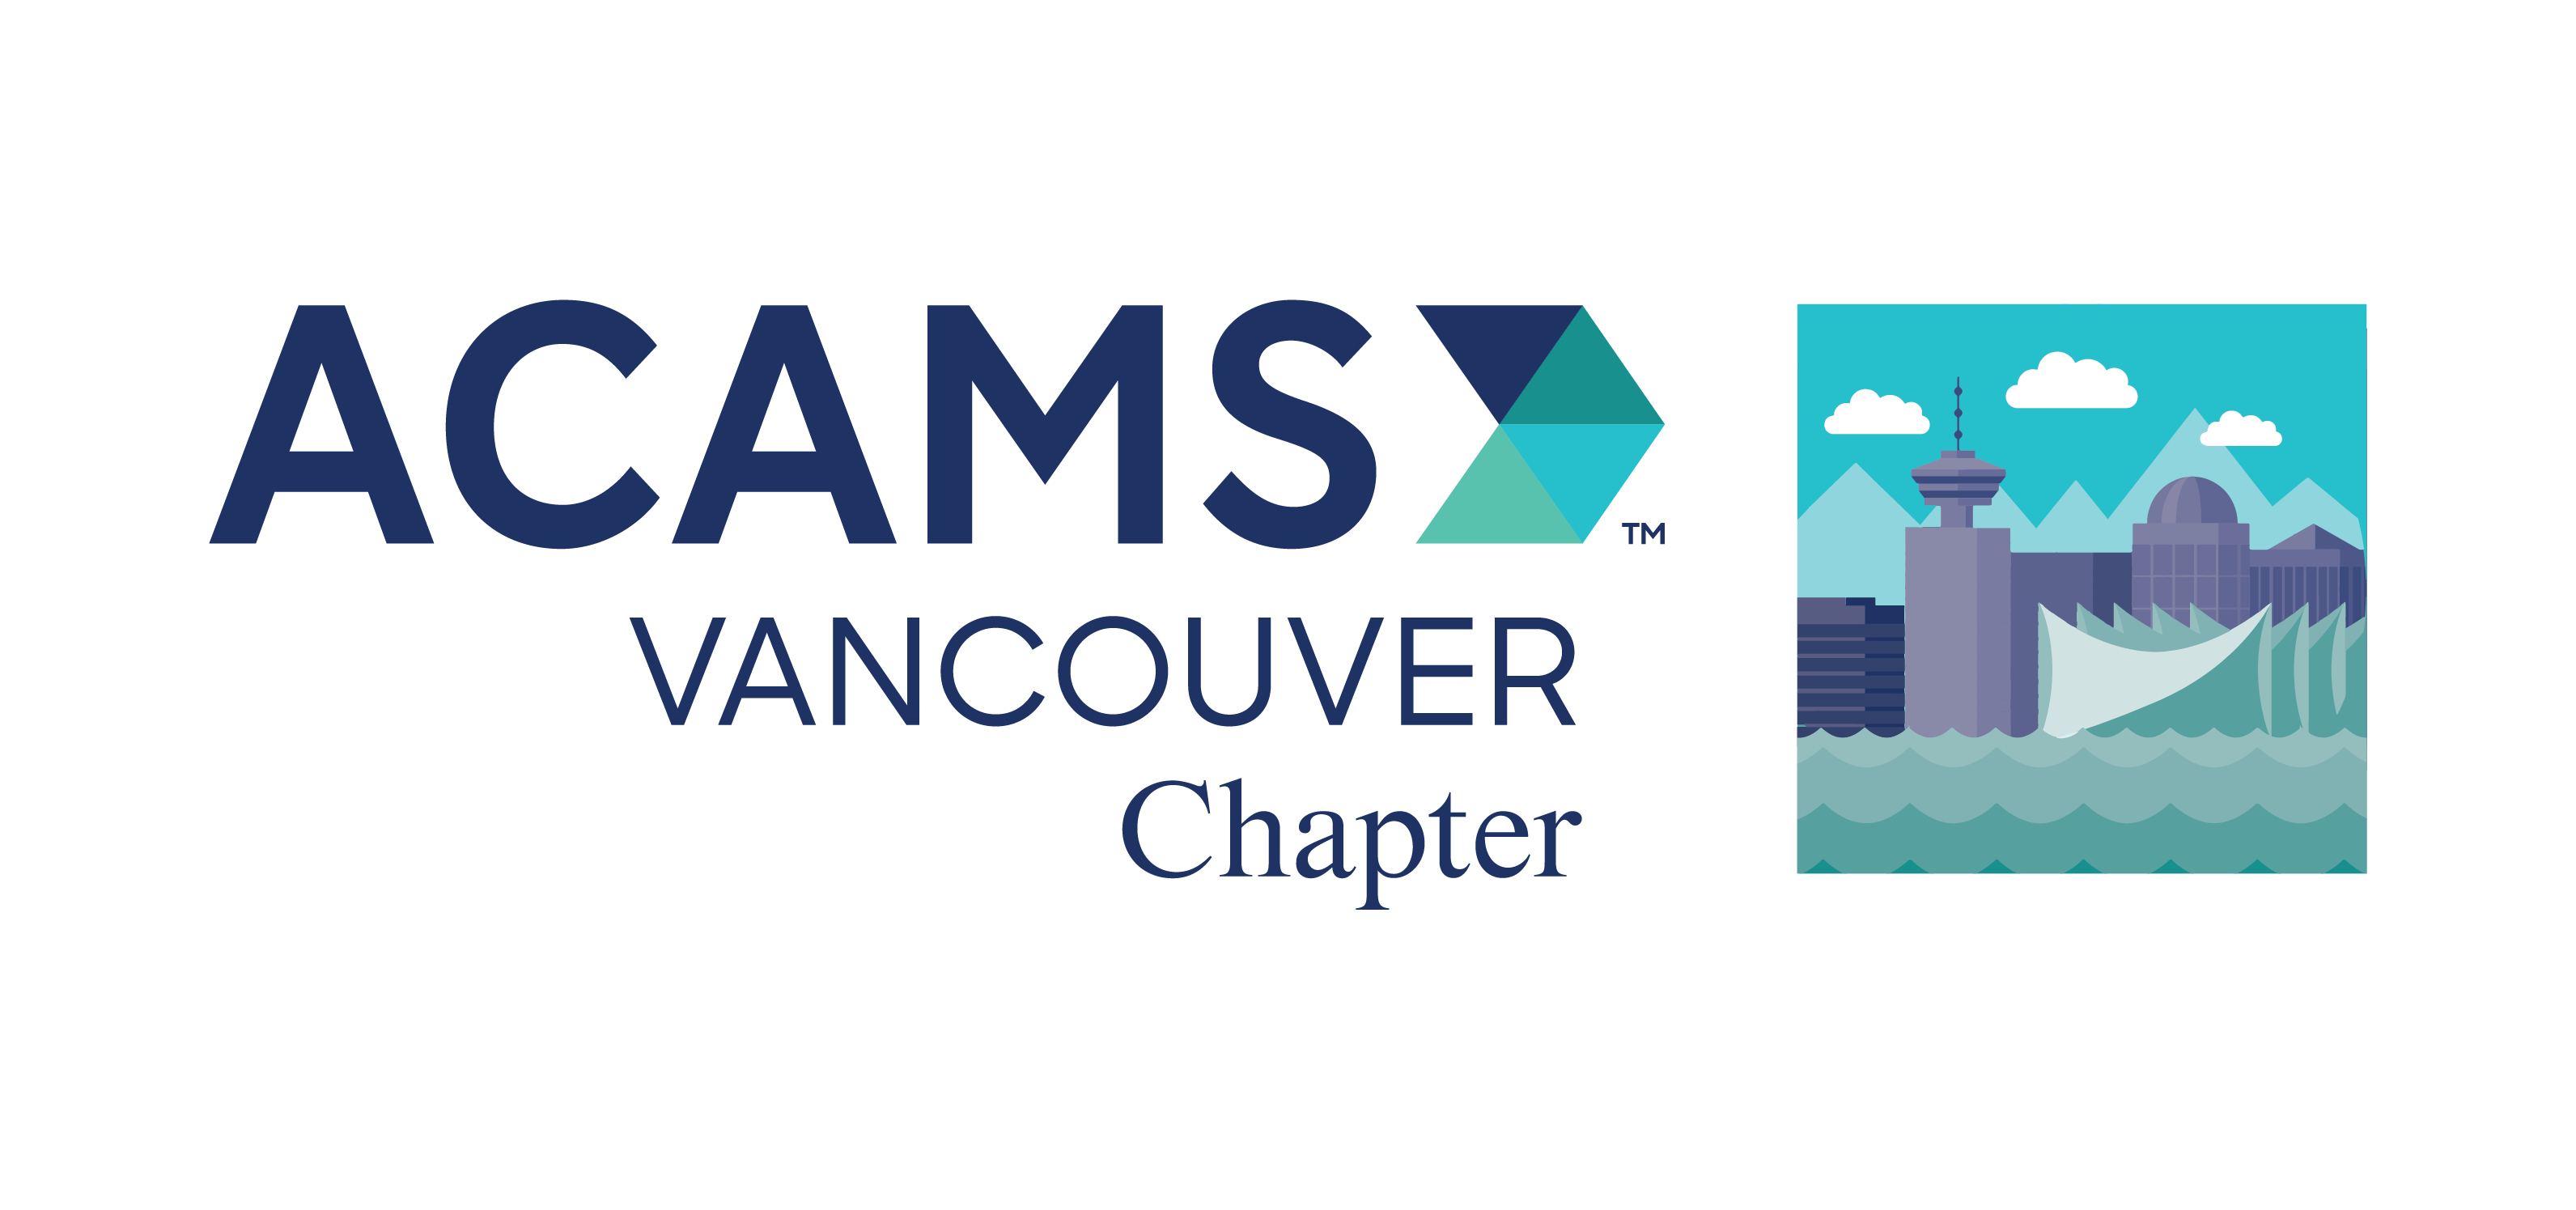 ACAMS Vancouver Chapter